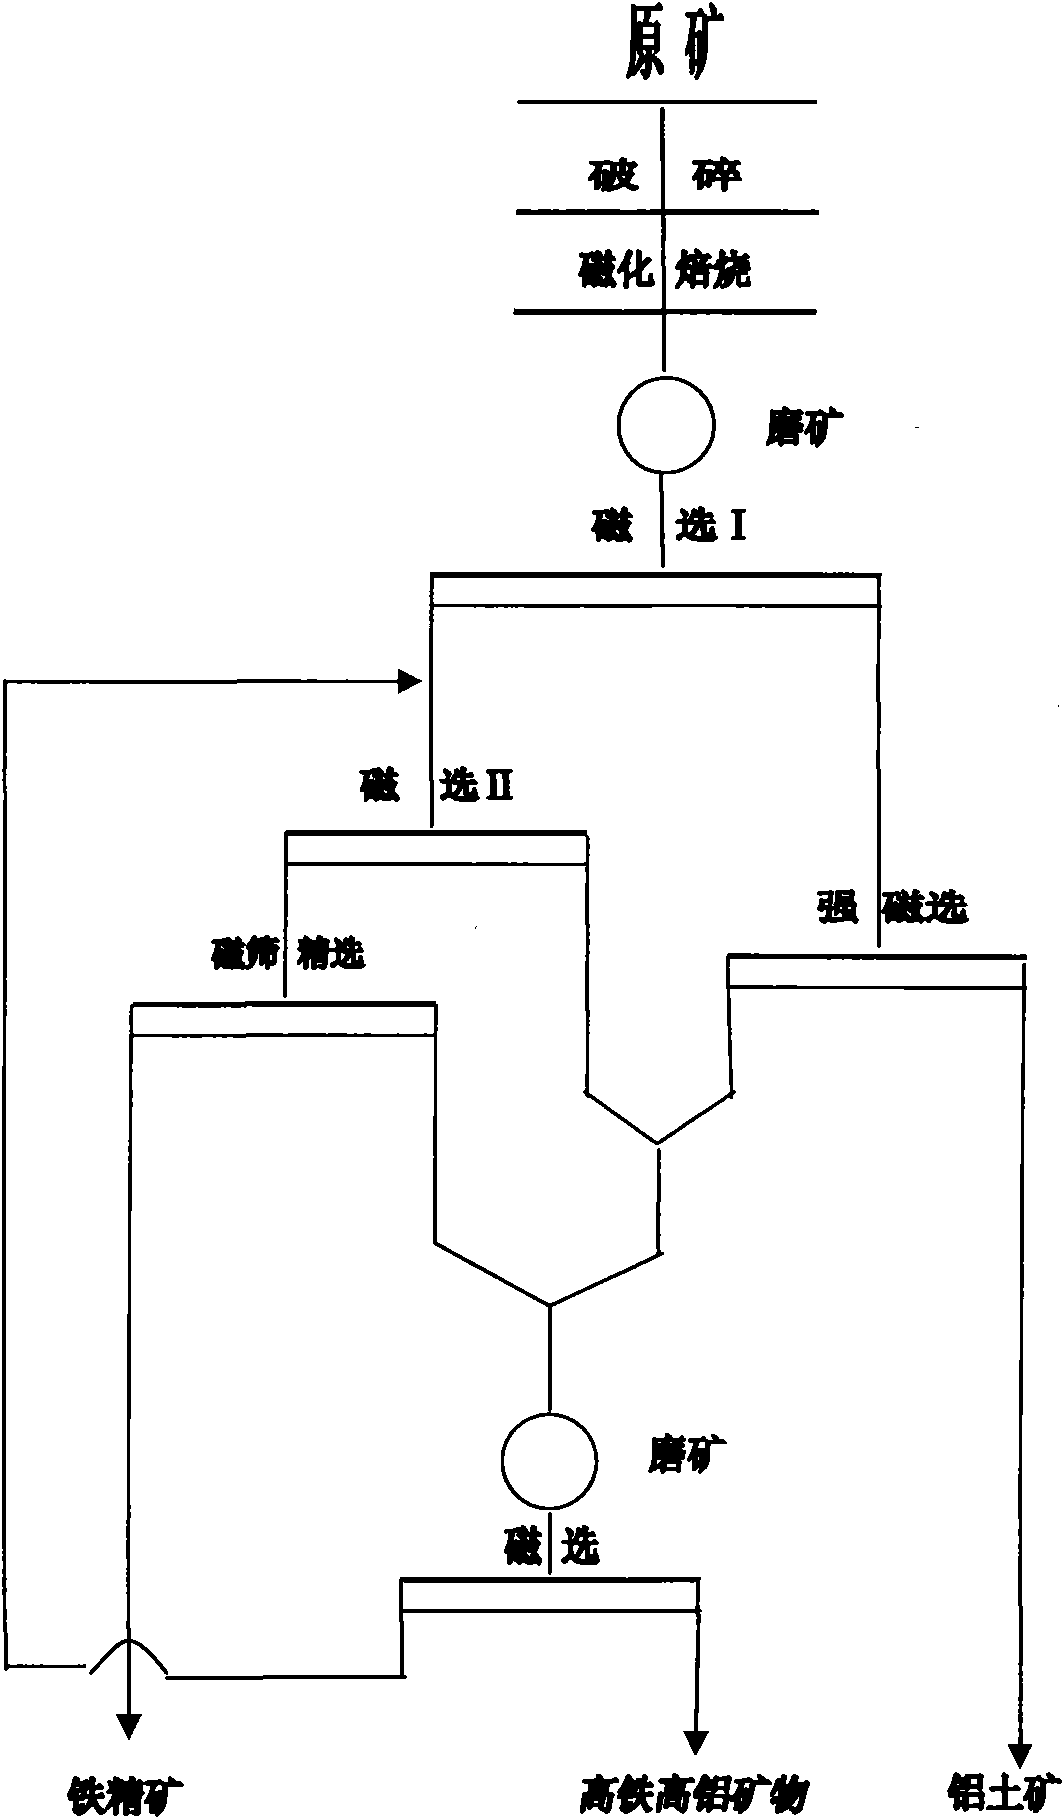 Method for separating aluminum and iron in high-iron bauxite